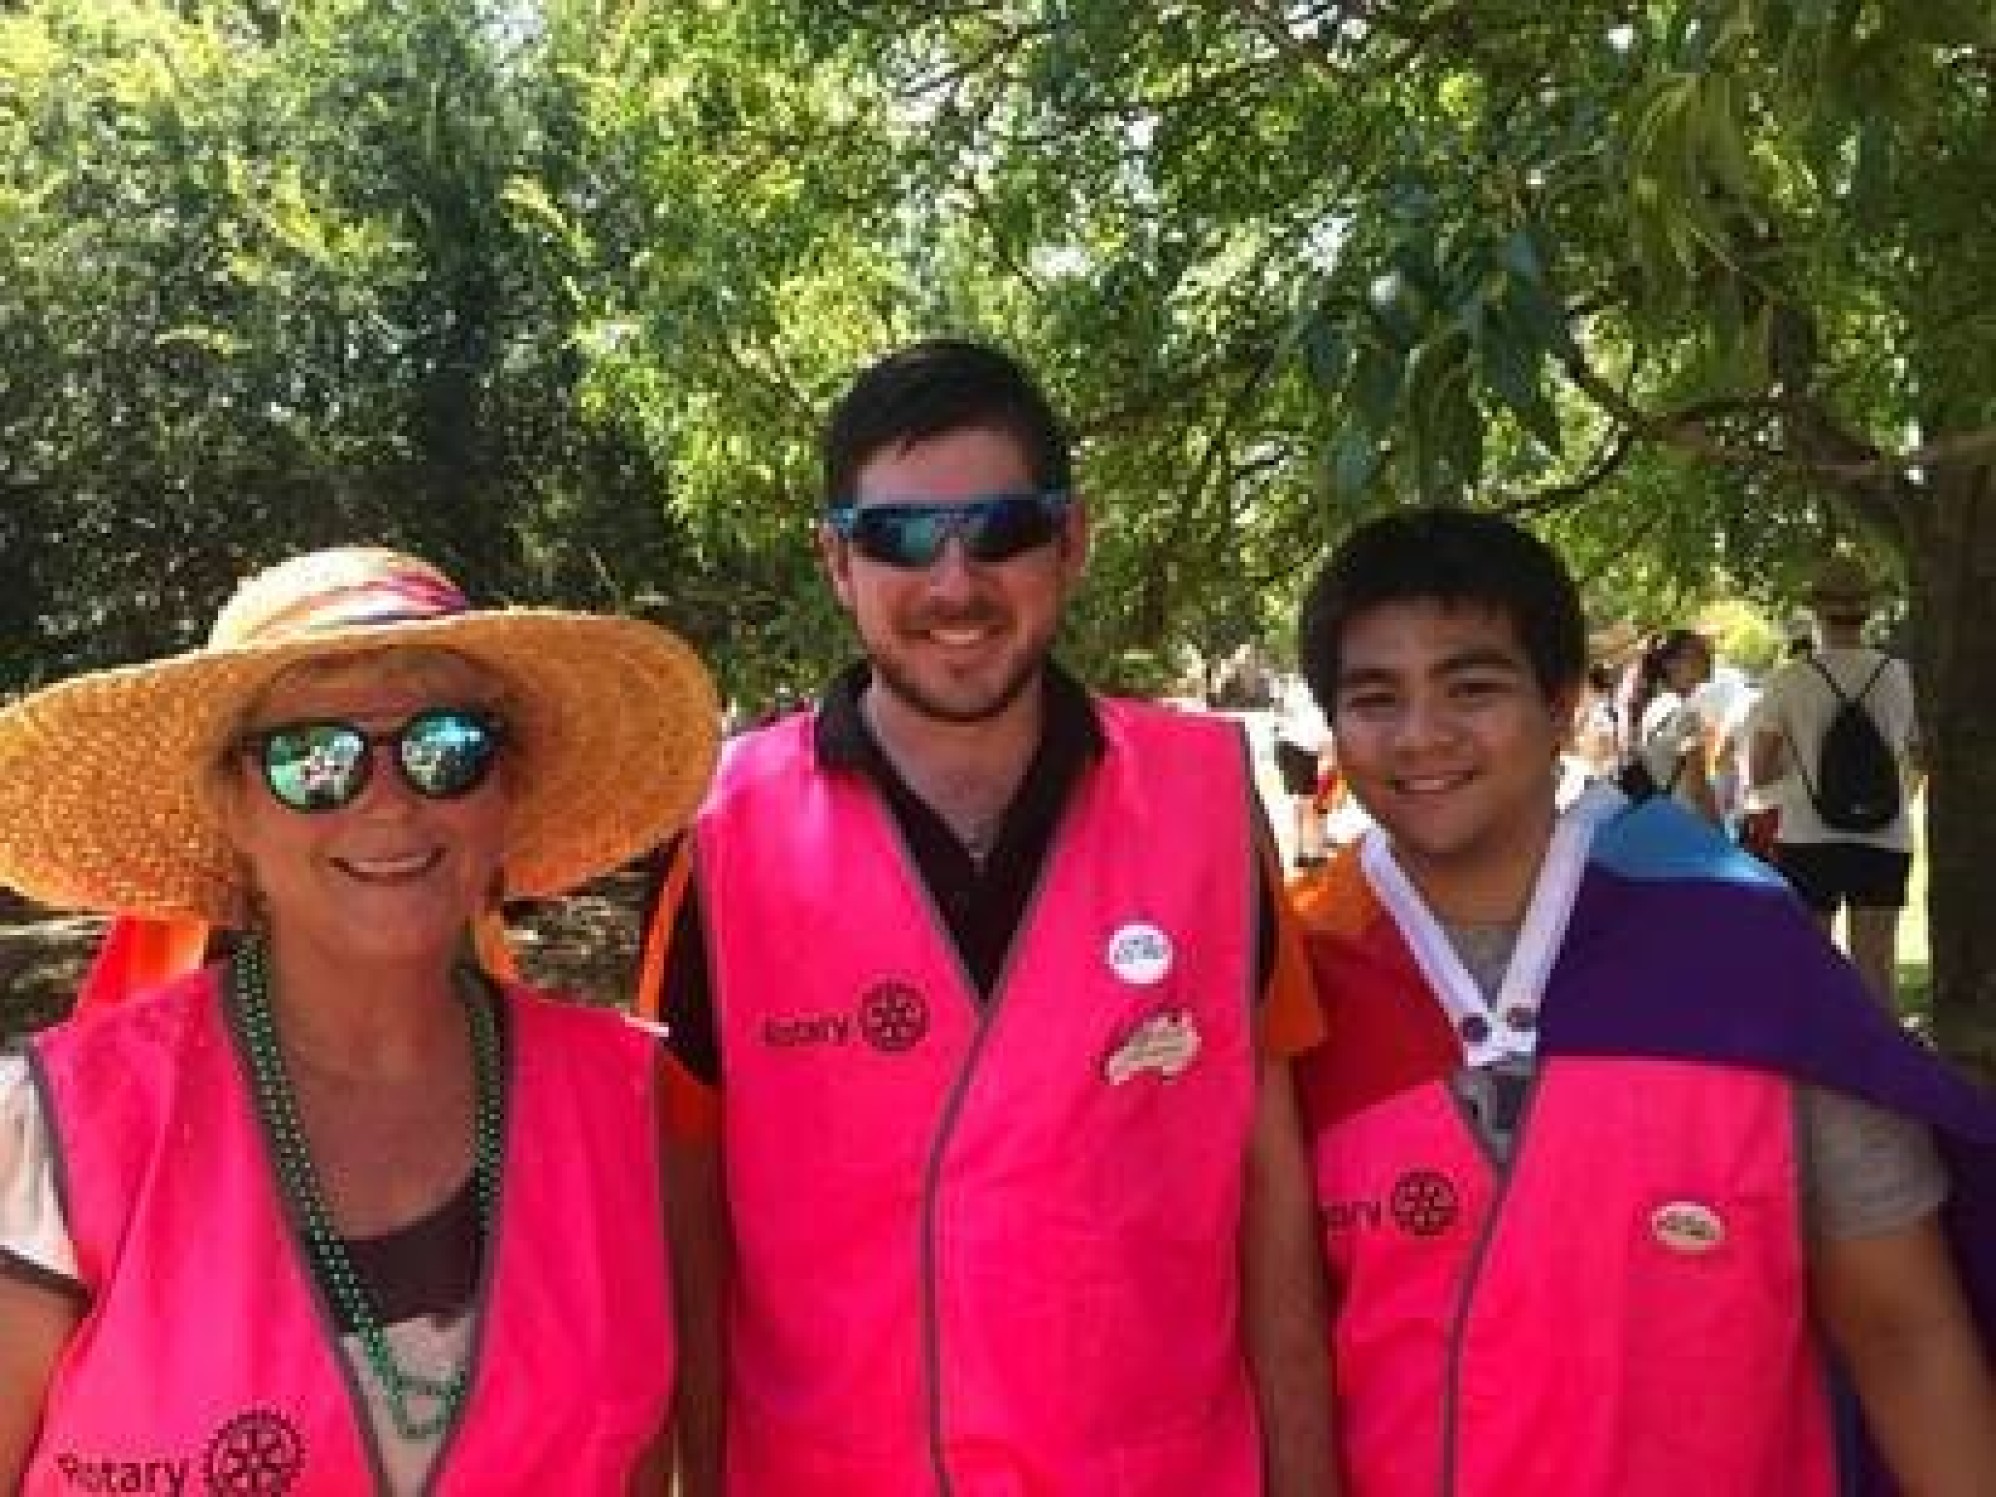 "We were so pleased to represent inclusiveness, community and be together during the Pride March in Rotary District 9800 2018 for the first time. Being part of this Fellowship is another milestone.” -Bronwyn Stephens 